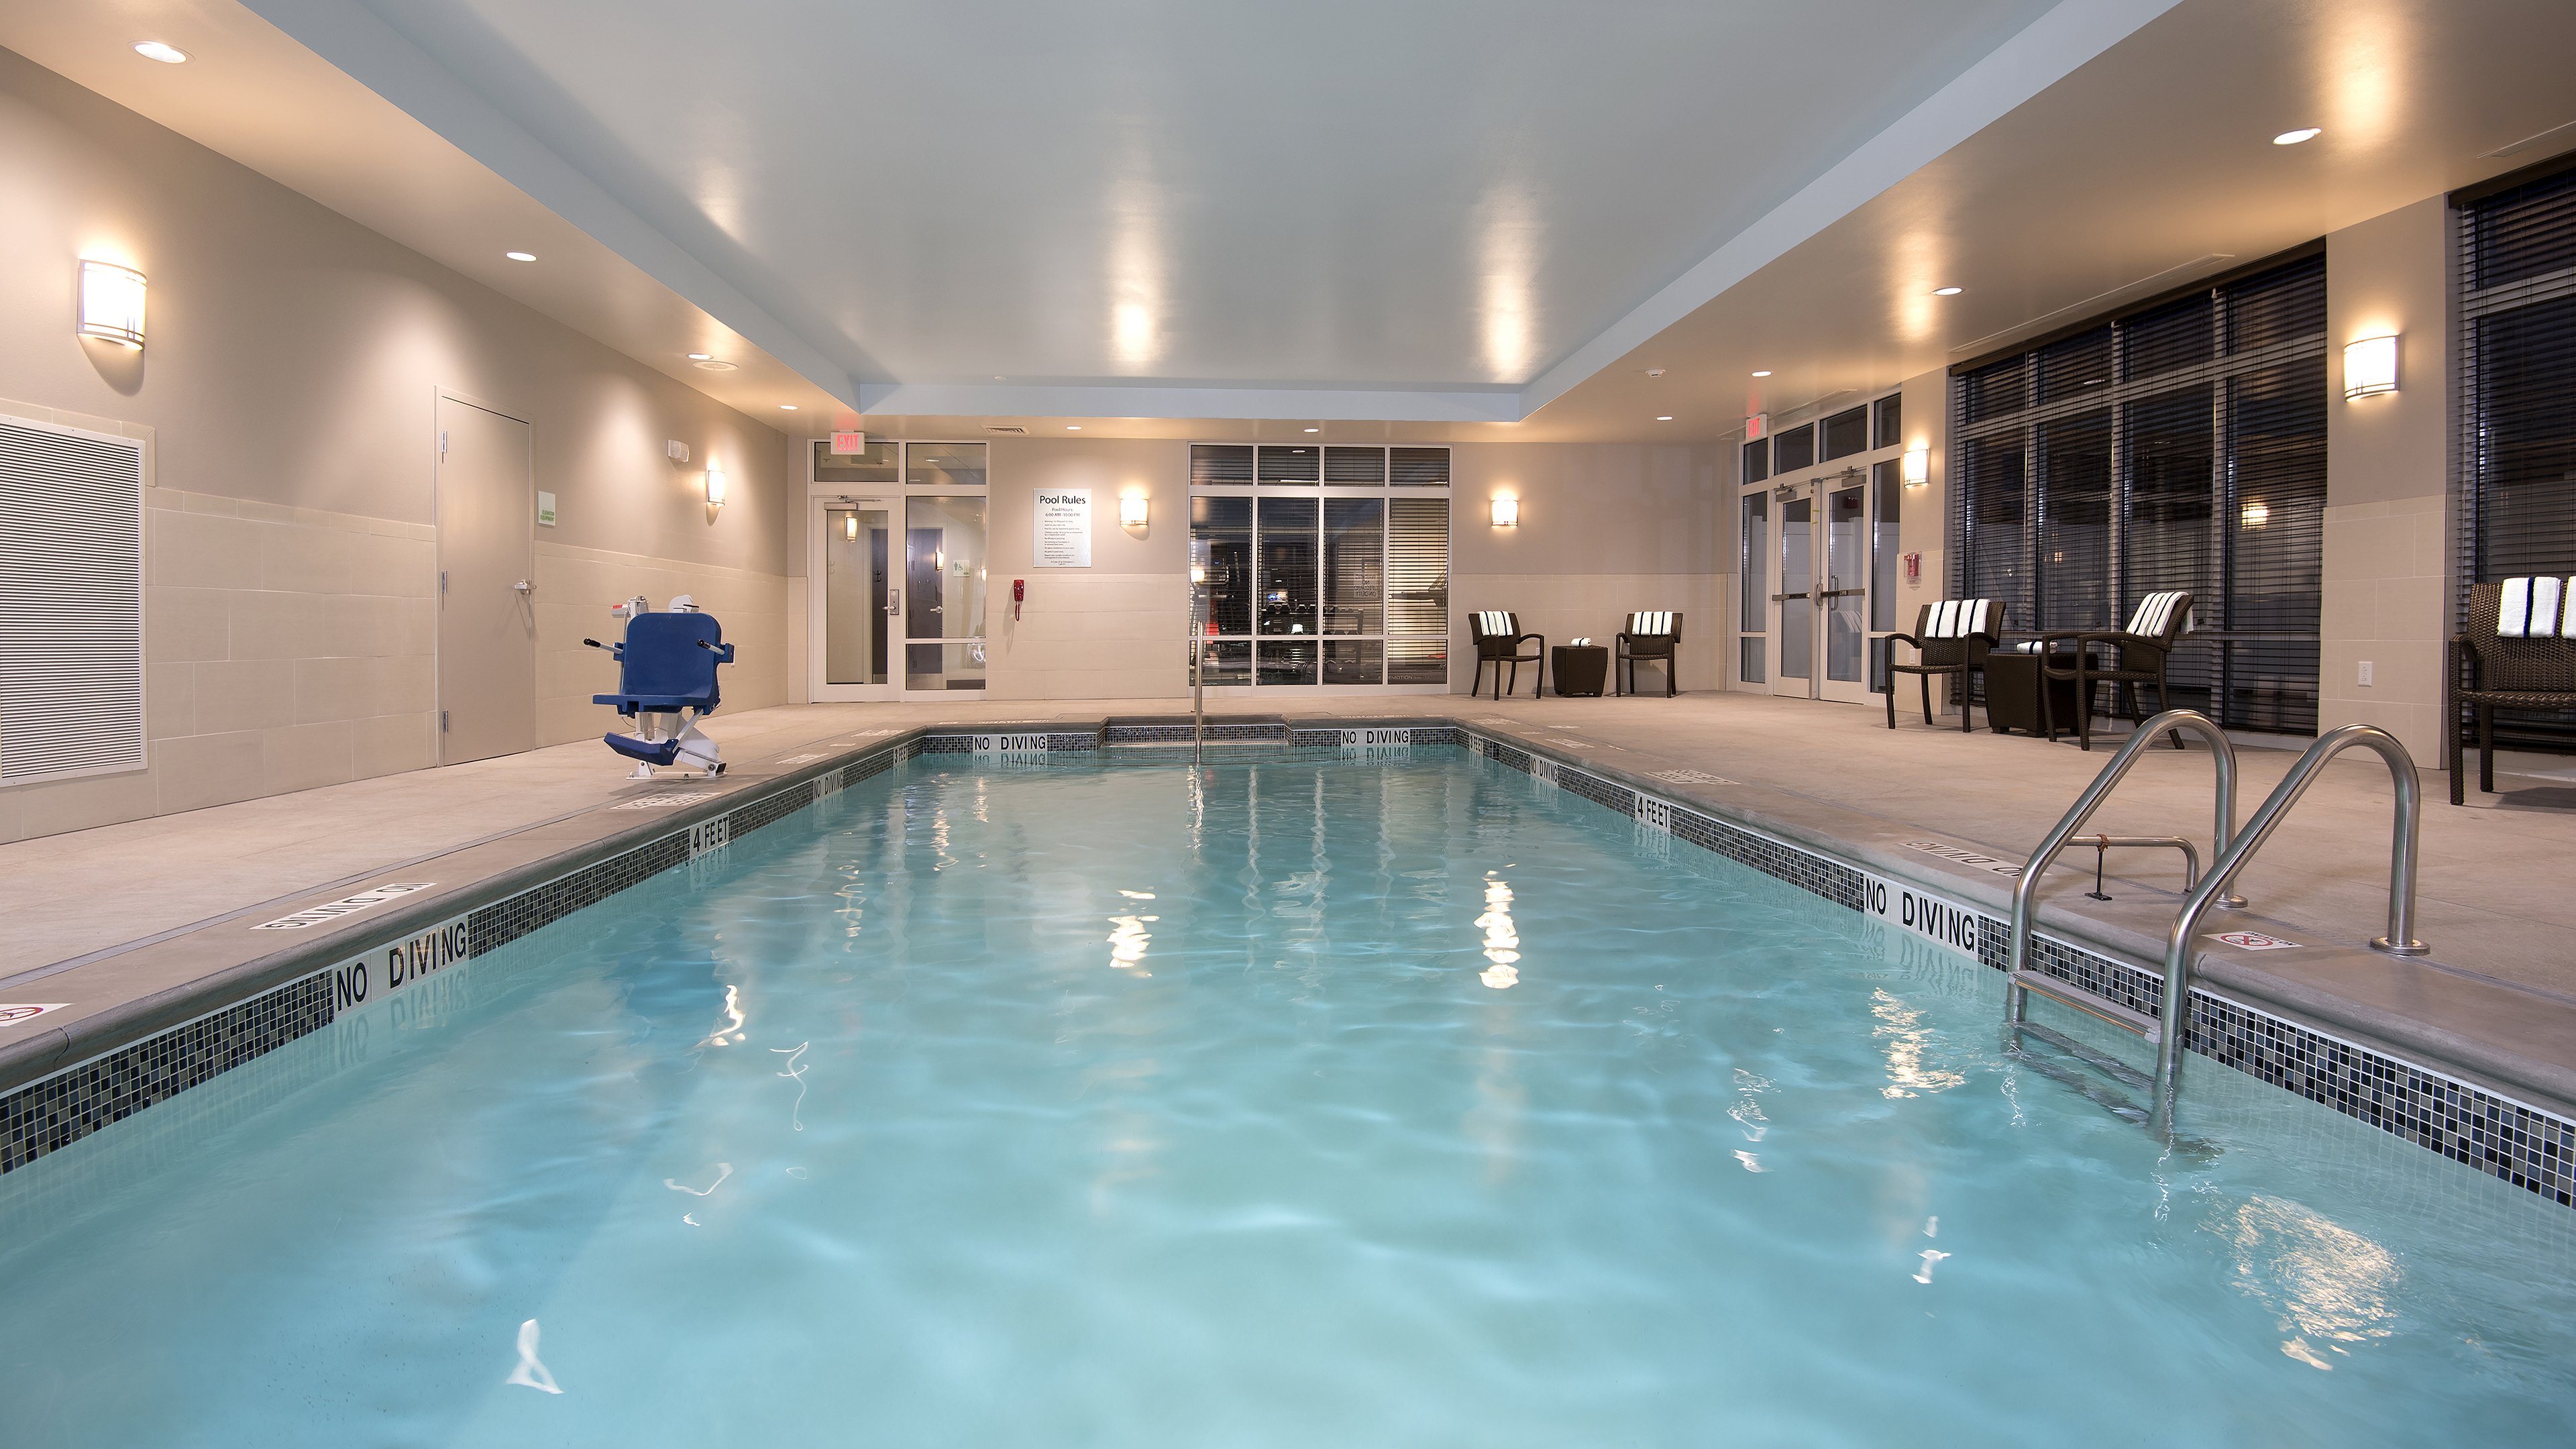 Indoor heated, saline pool. Prefect for families or working out.